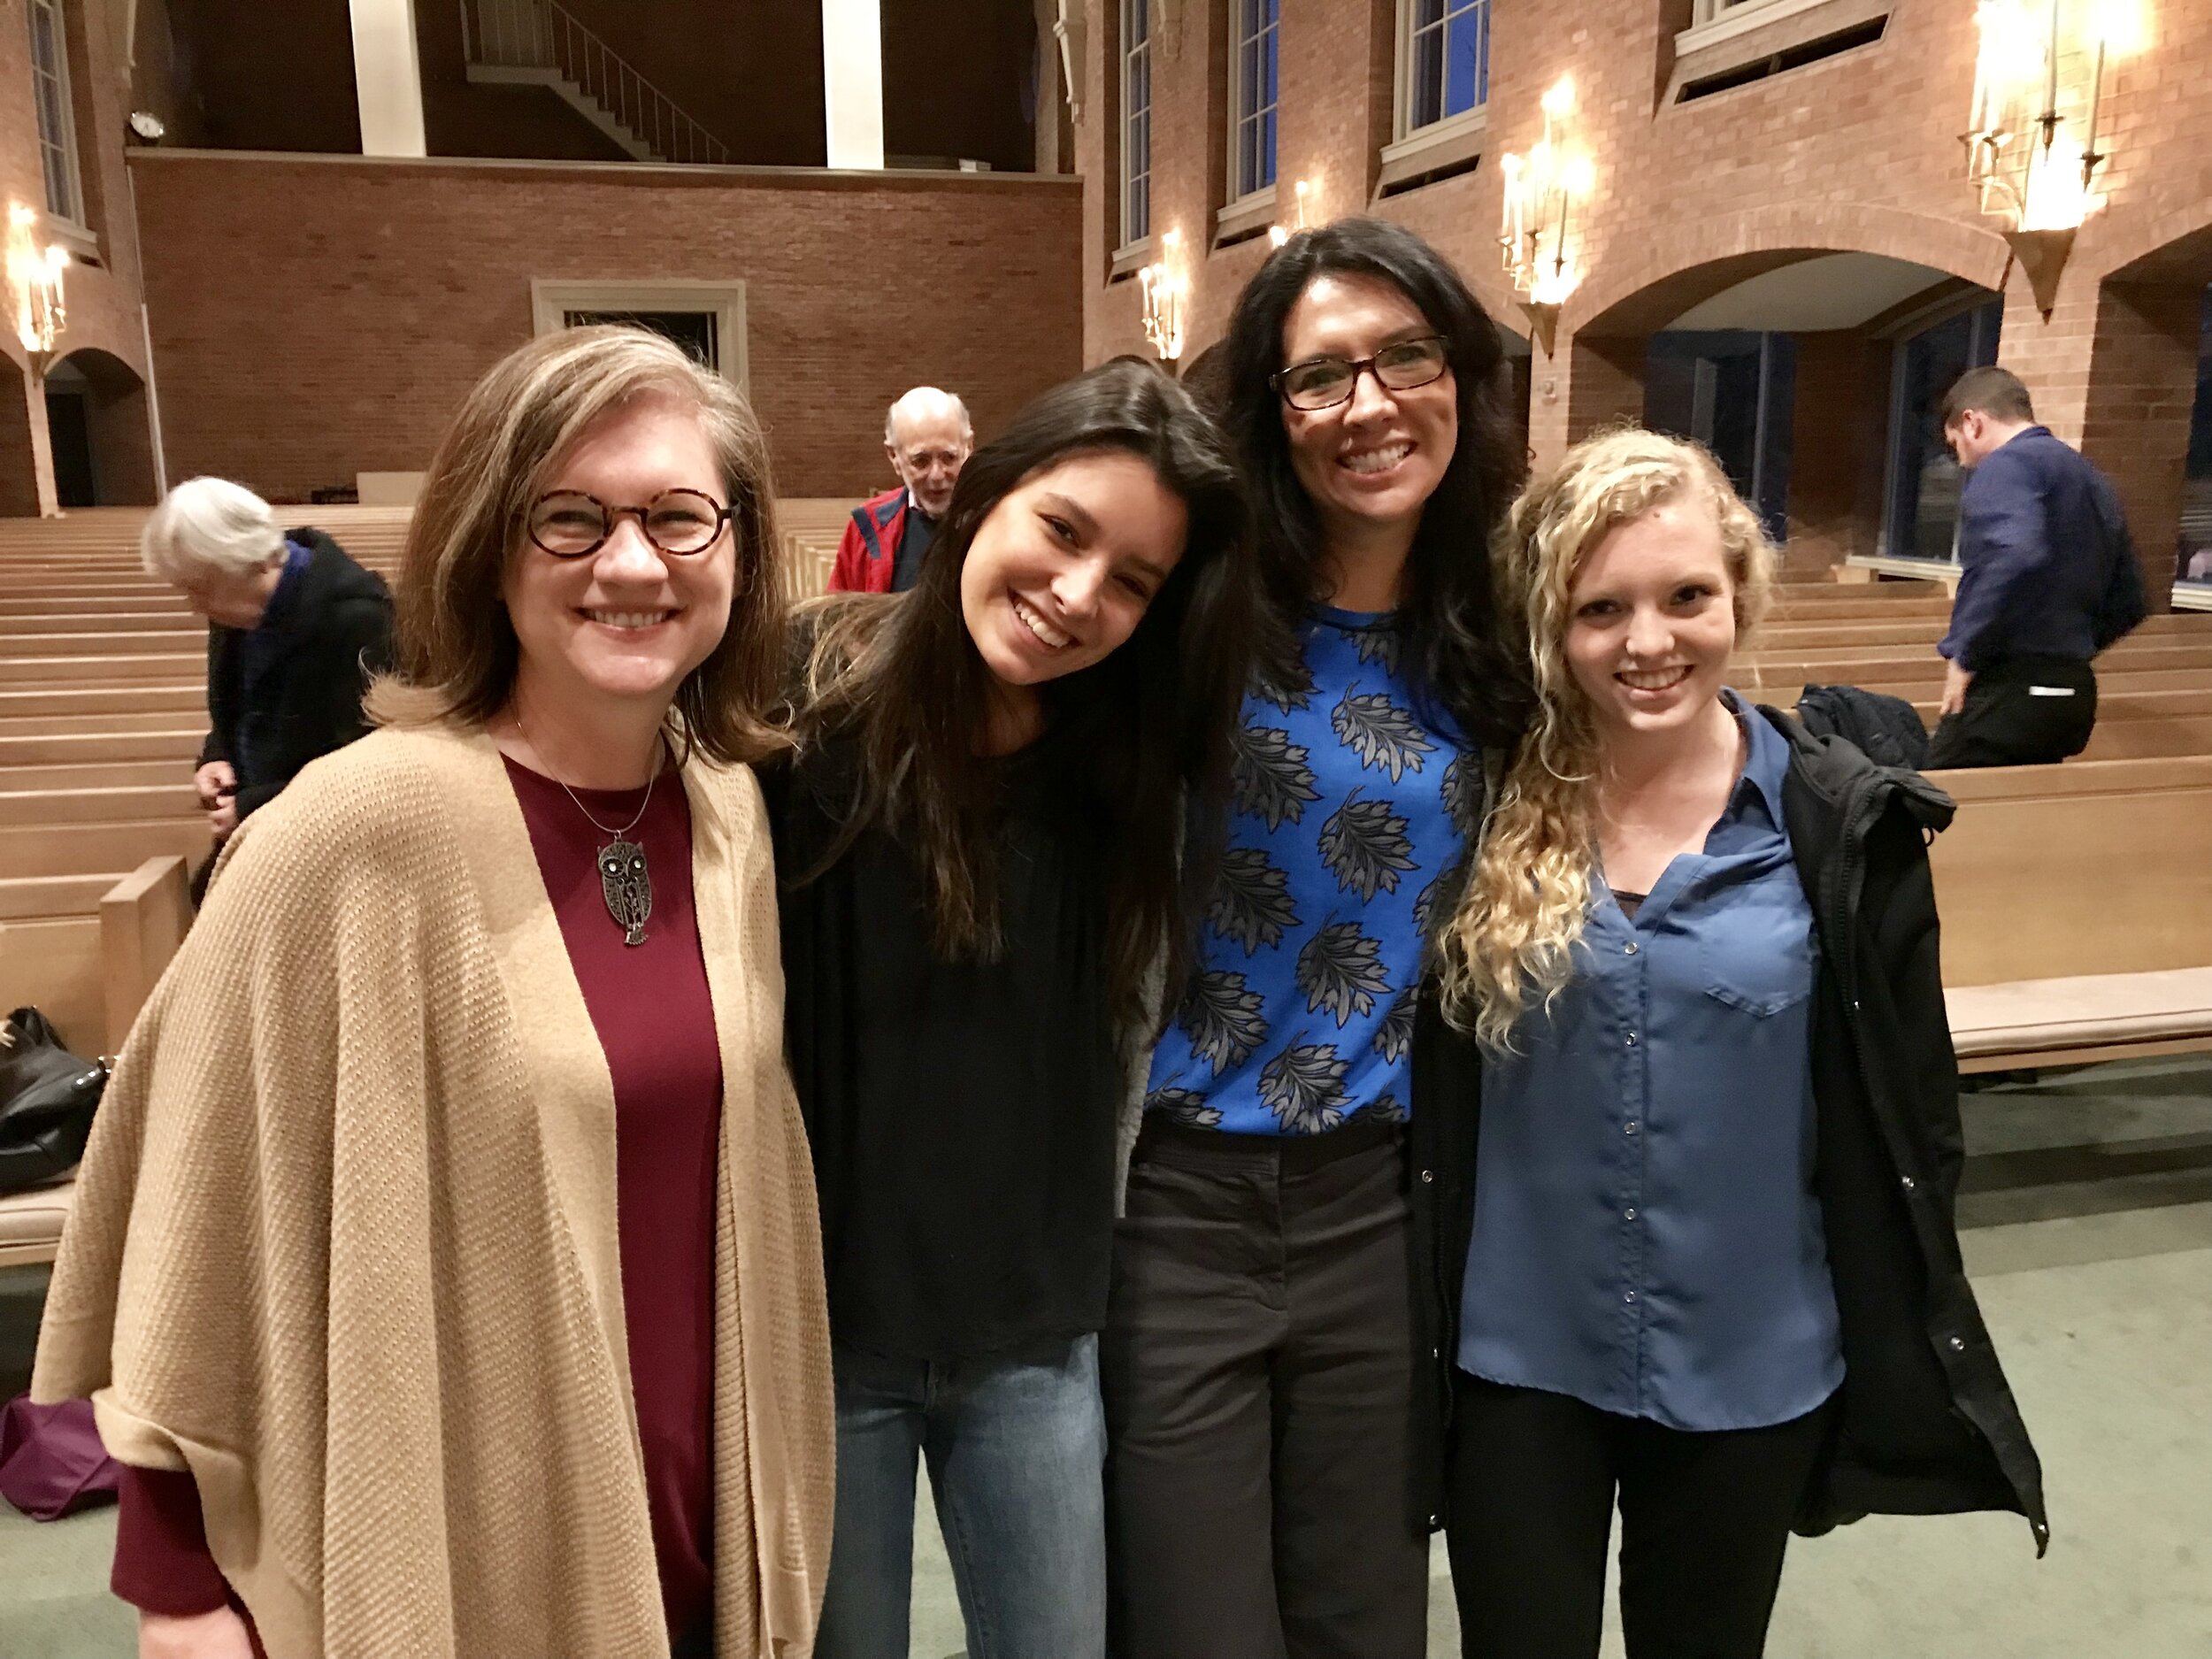  The Russells and Bartons visited All Saints from out of town. Rylee, a high school senior, (second from the left) led worship, and Falon, a theology graduate student (far right) preached her first sermon in a church. 